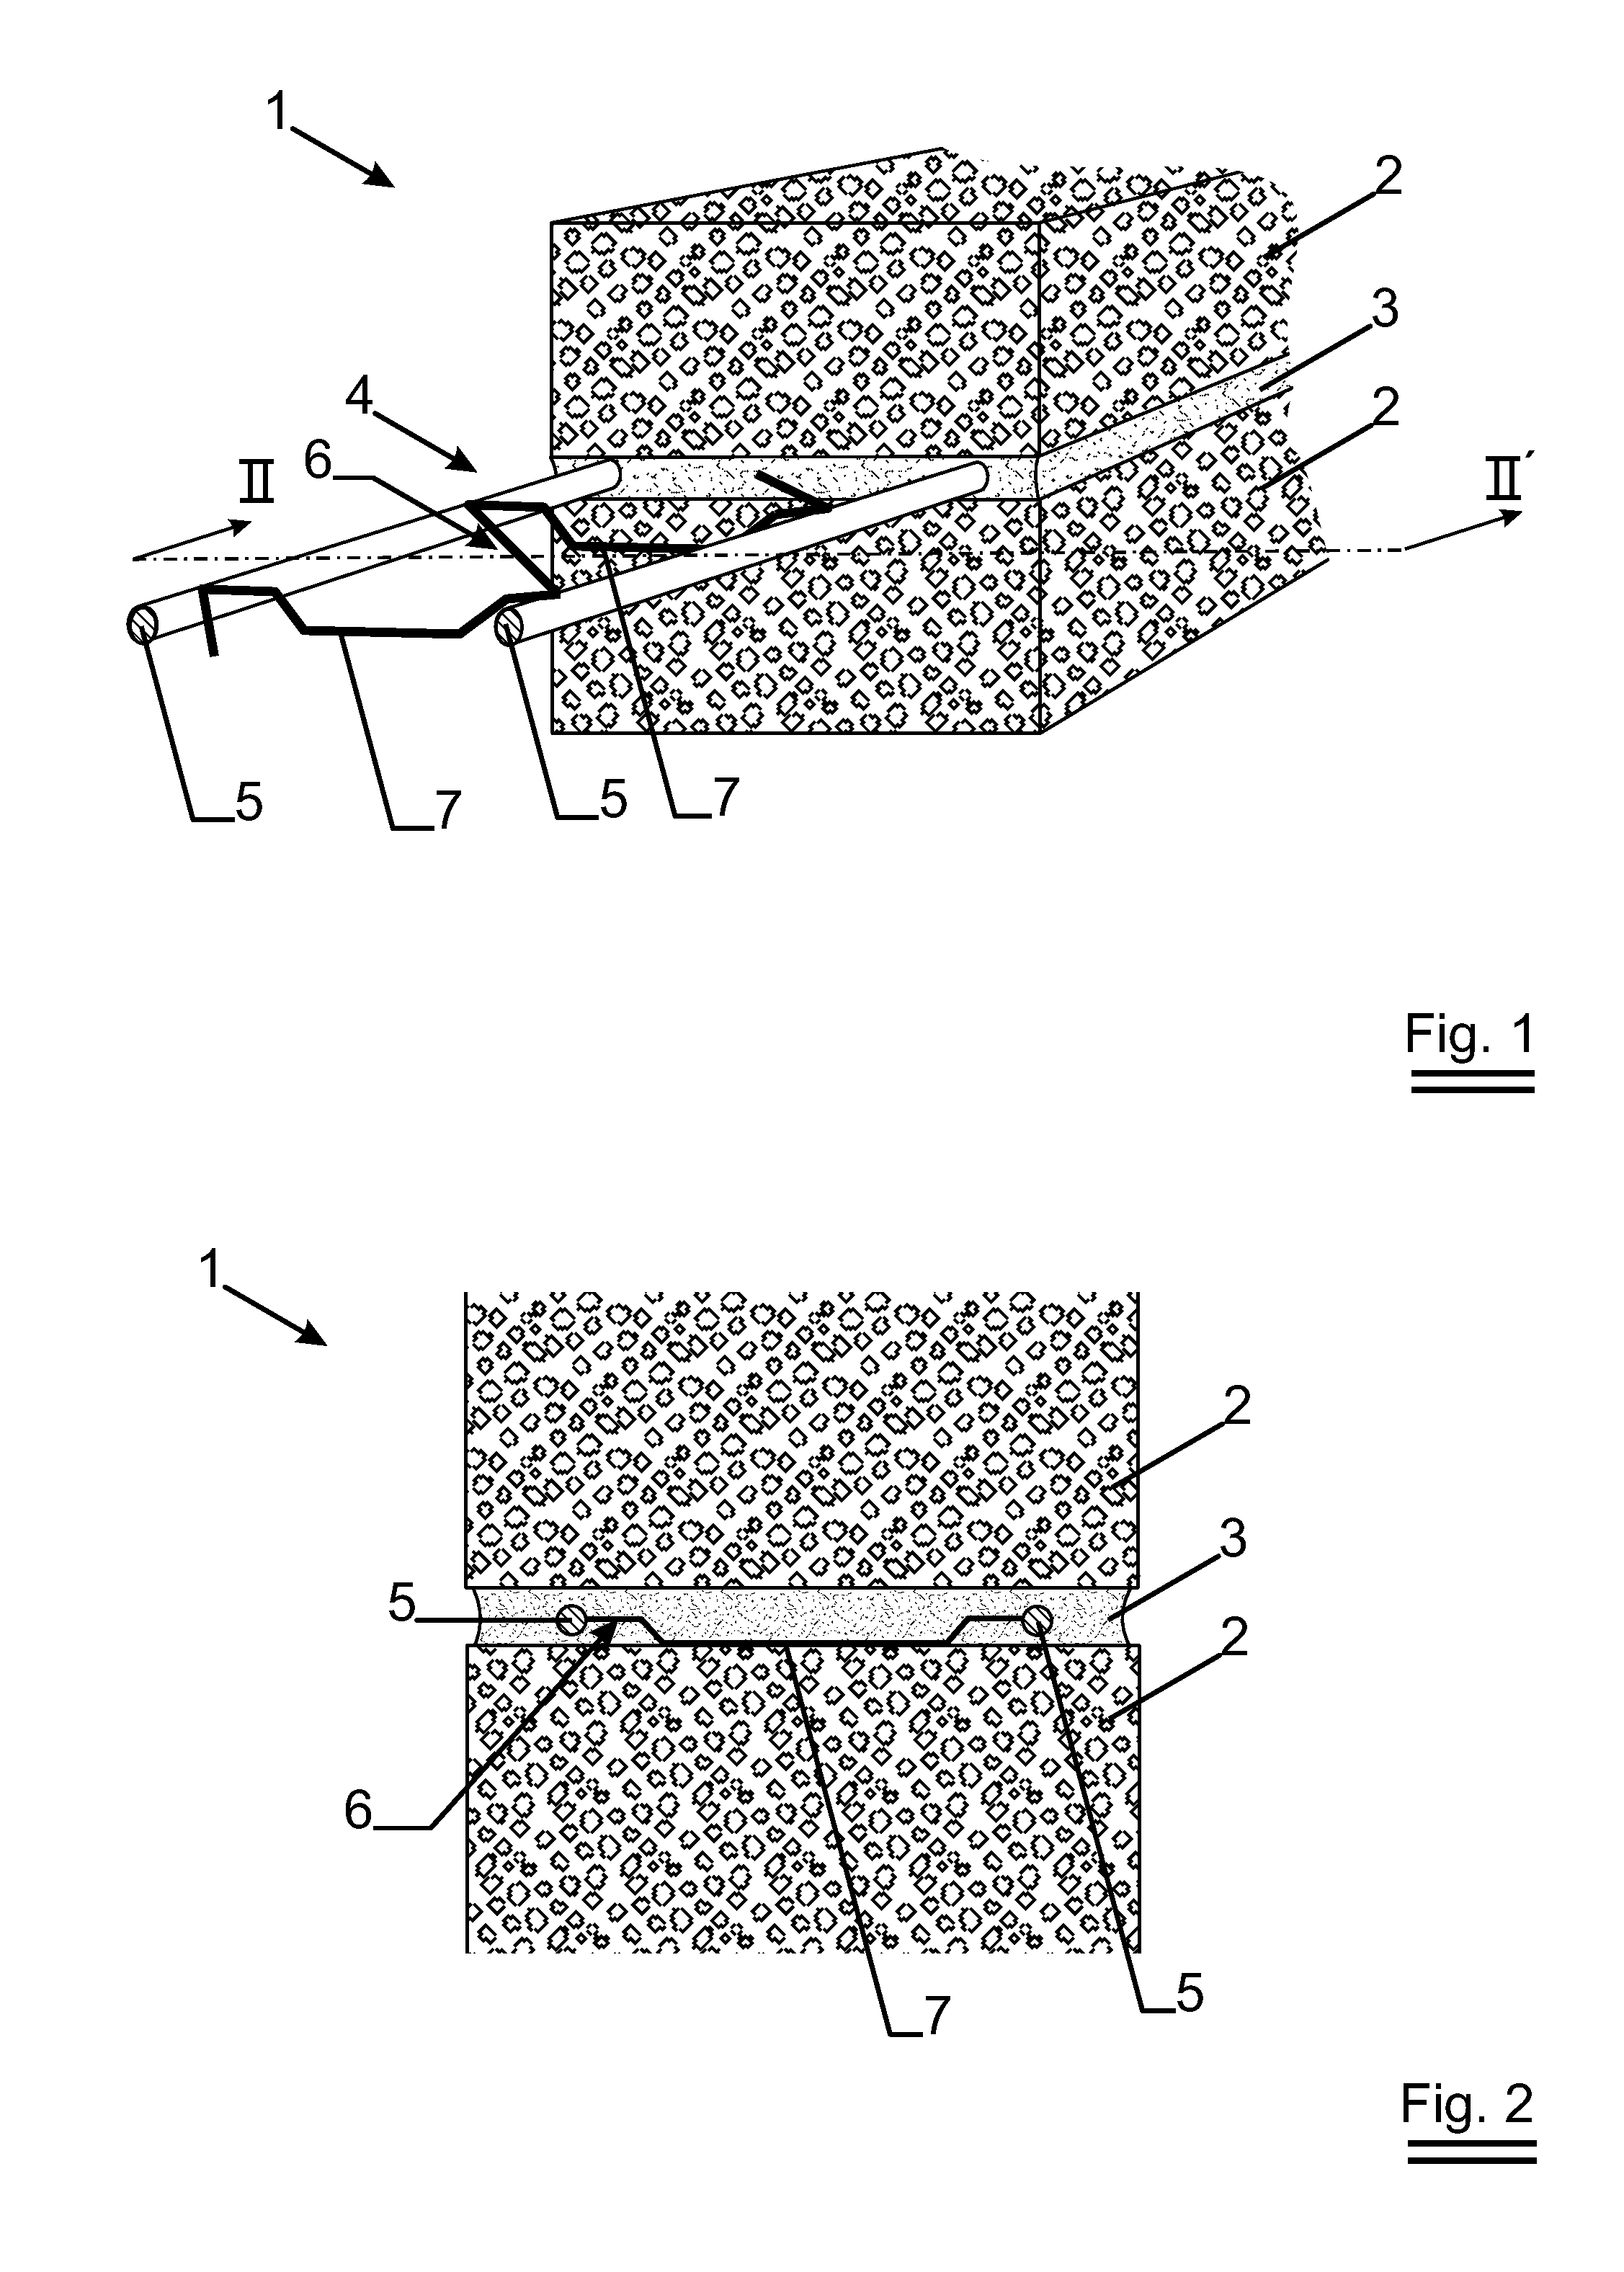 Masonry with steel reinforcement strip having spacers